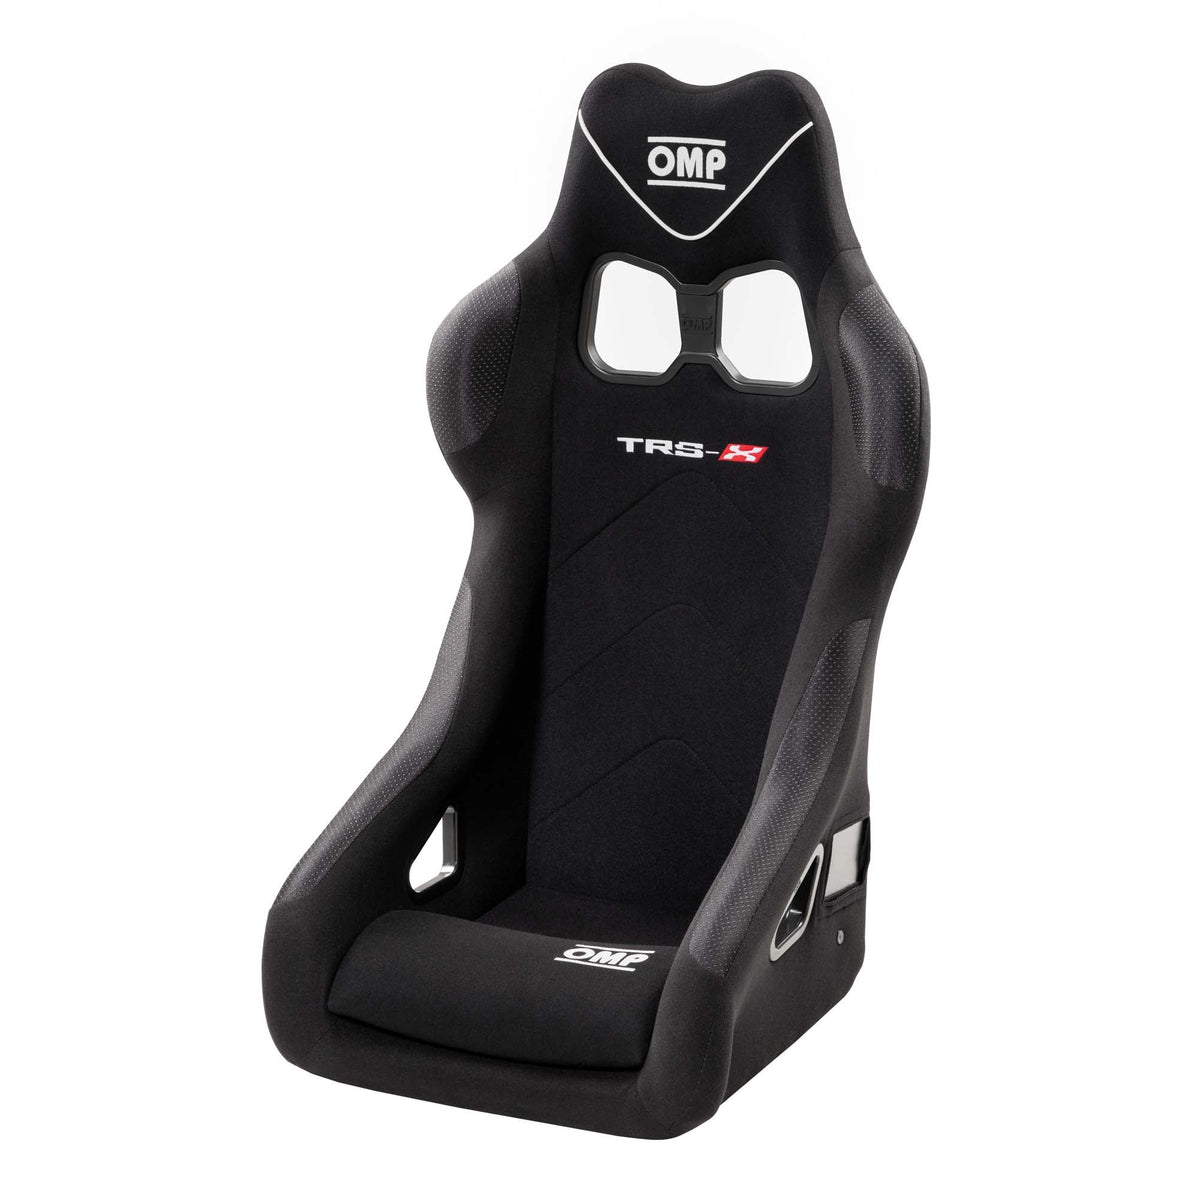 OMP TRS-X Racing Seat